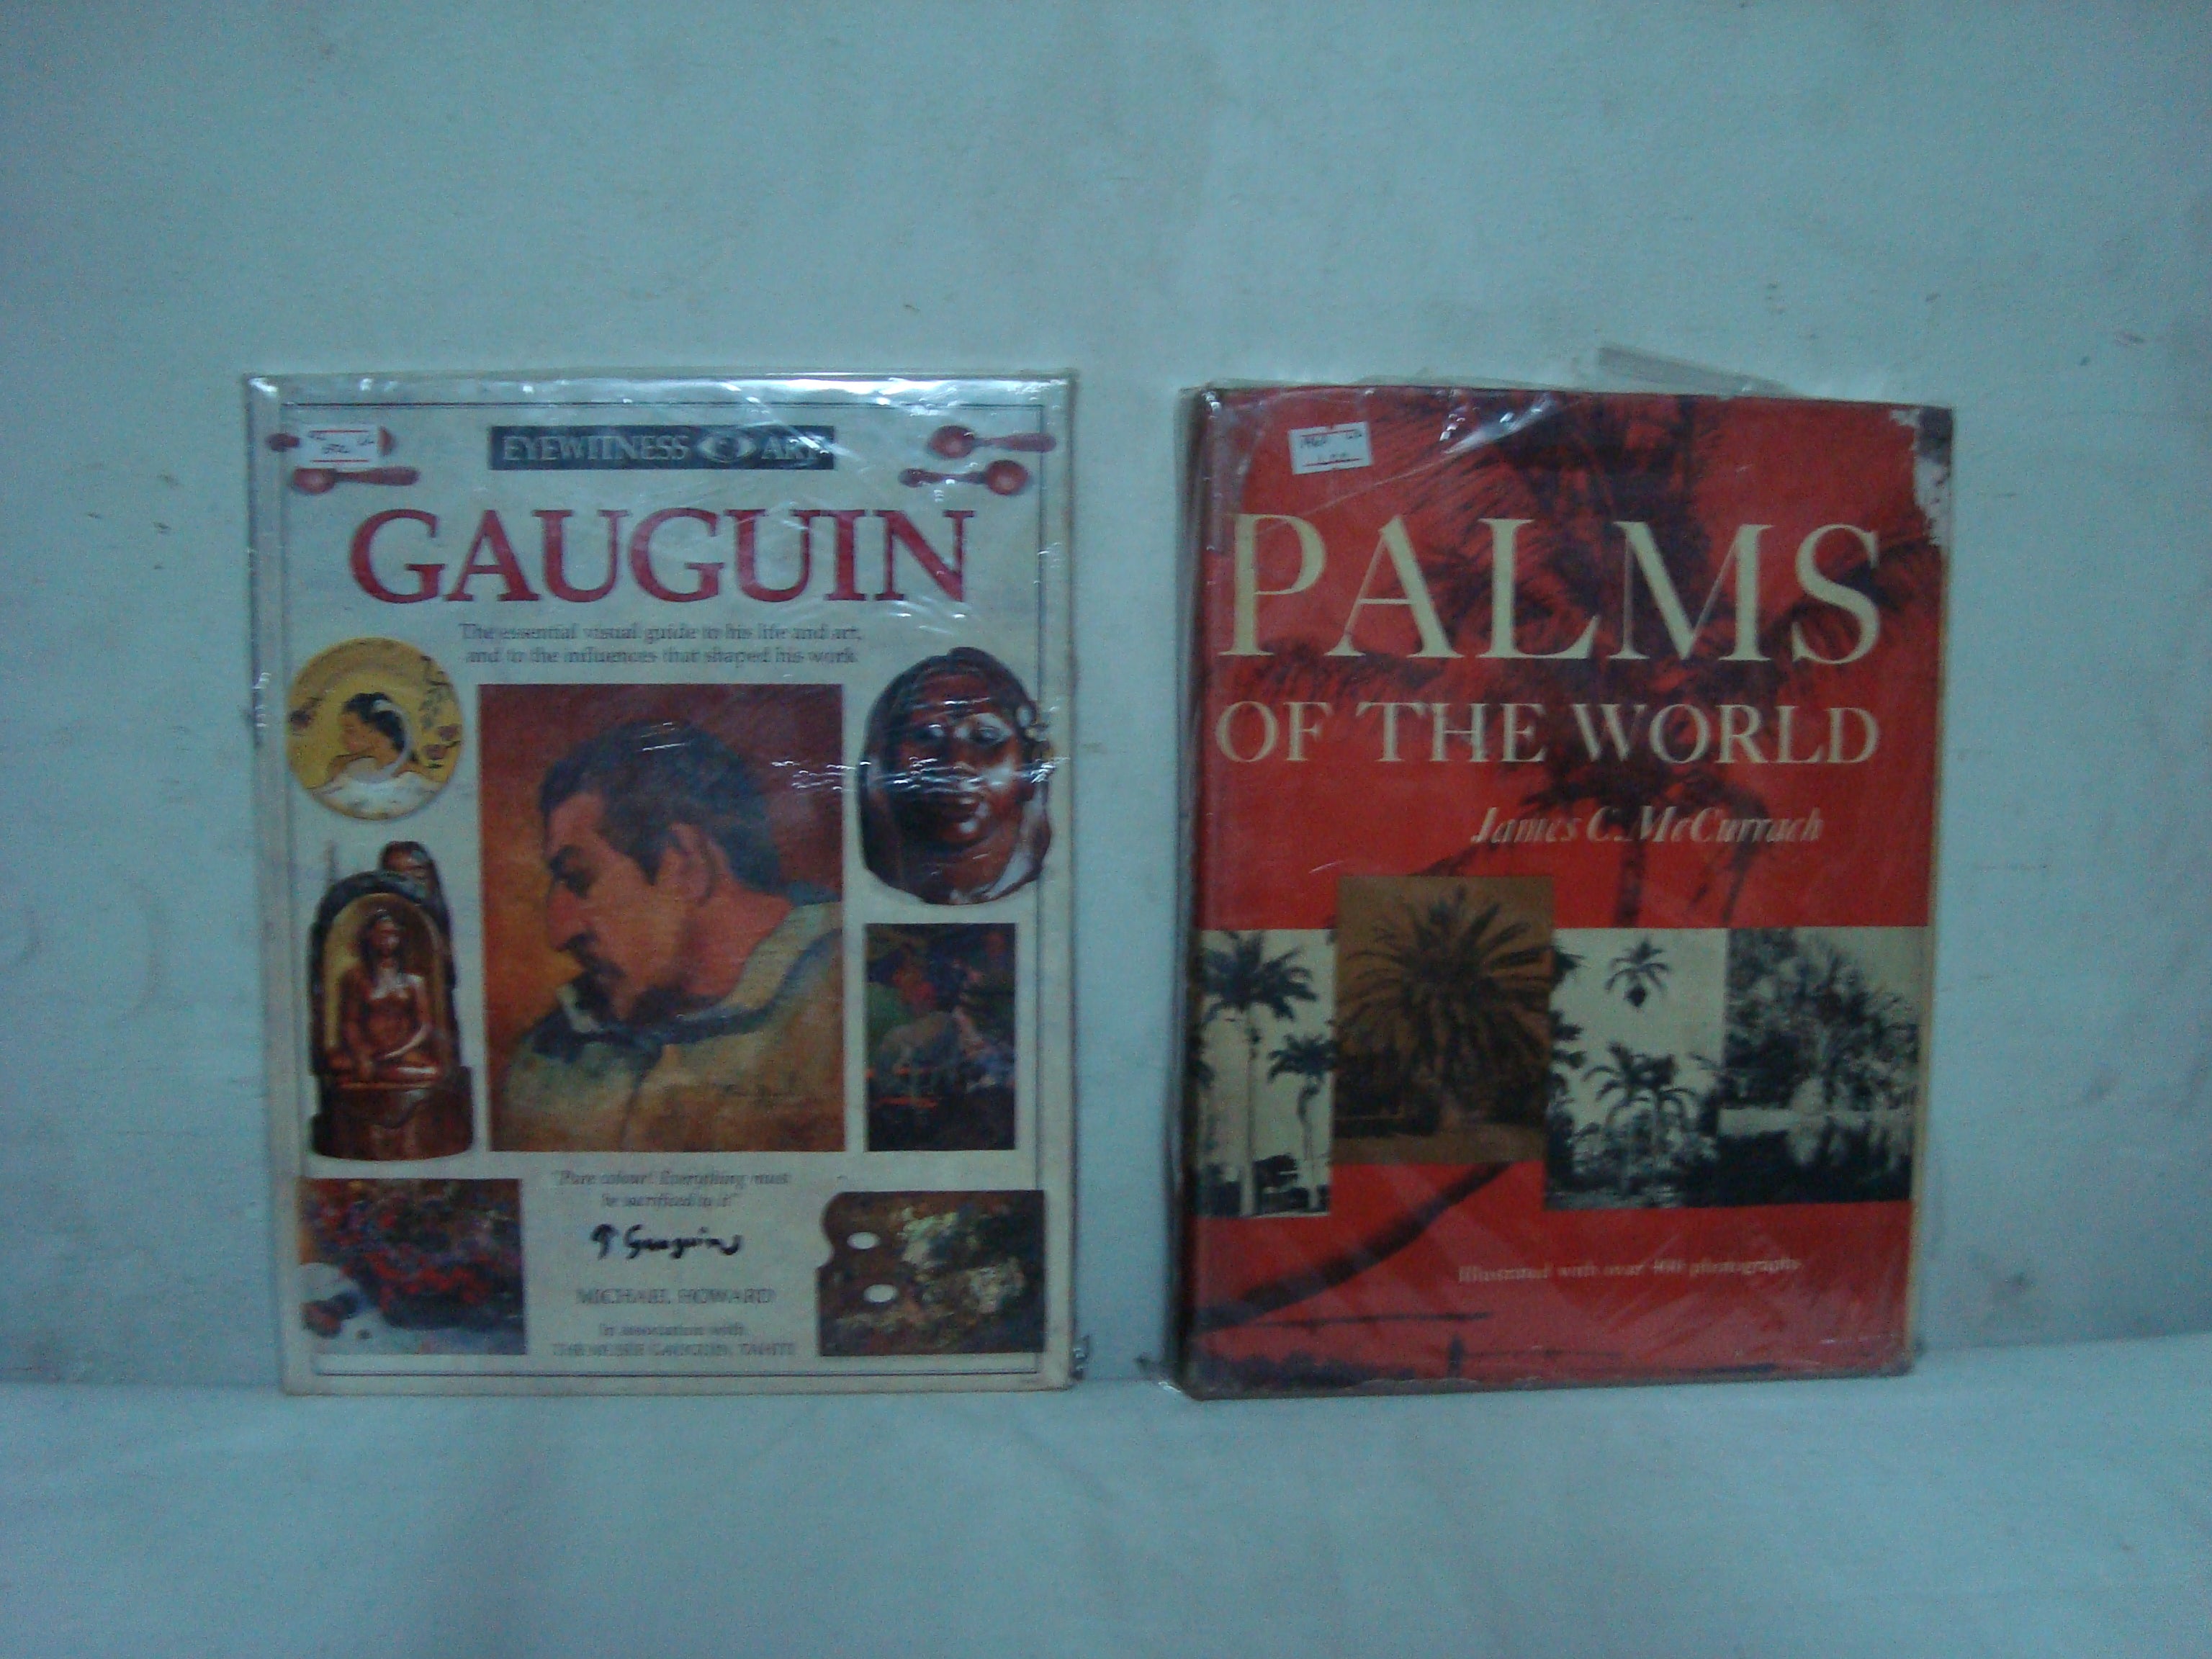 Gauguin & Palms of the World